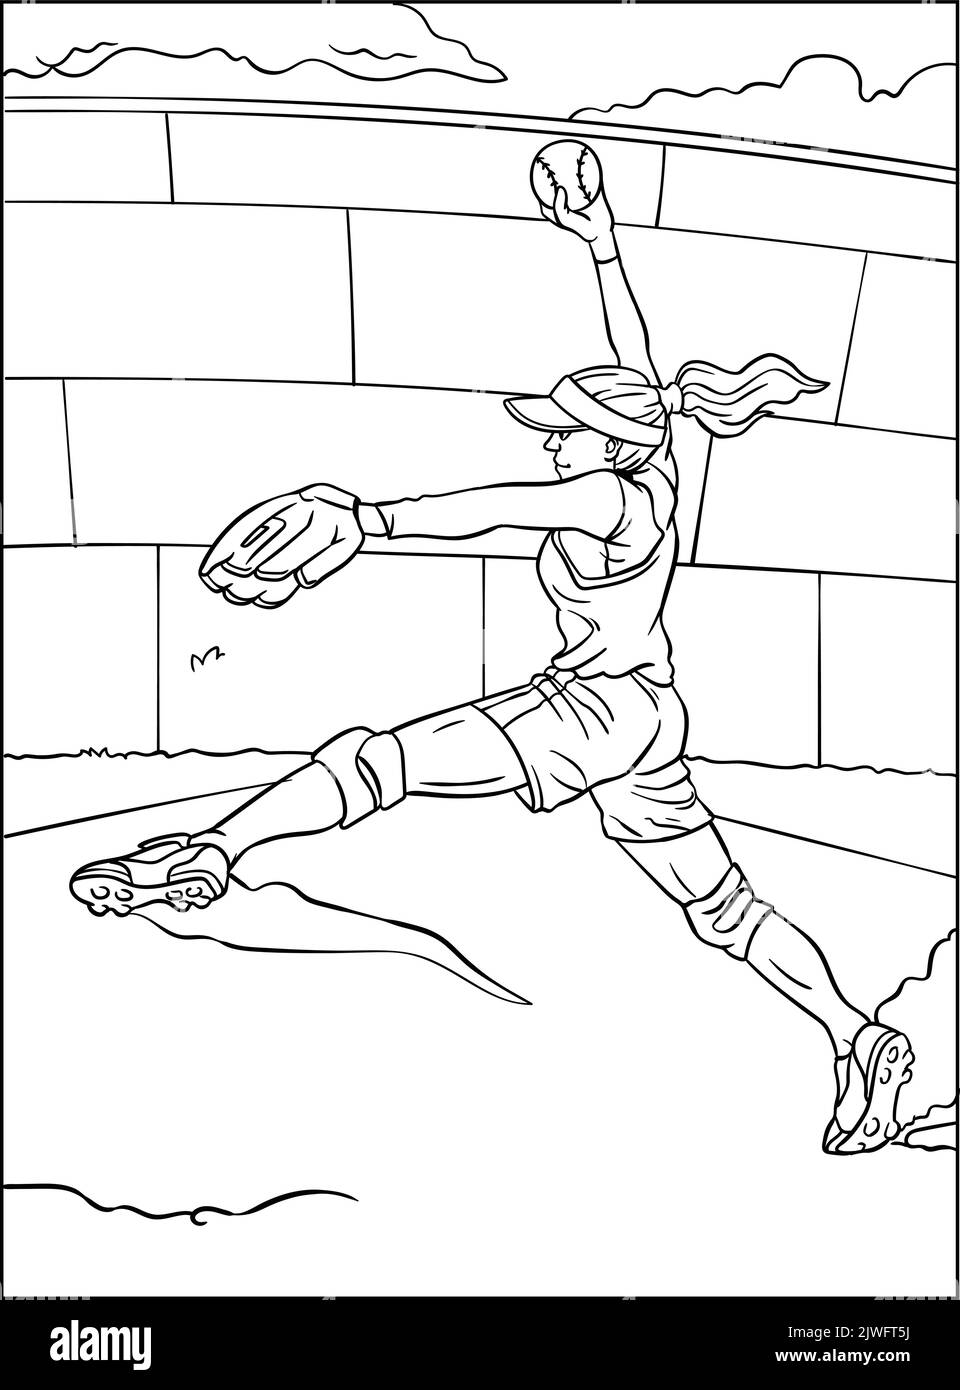 spanish coloring pages sports